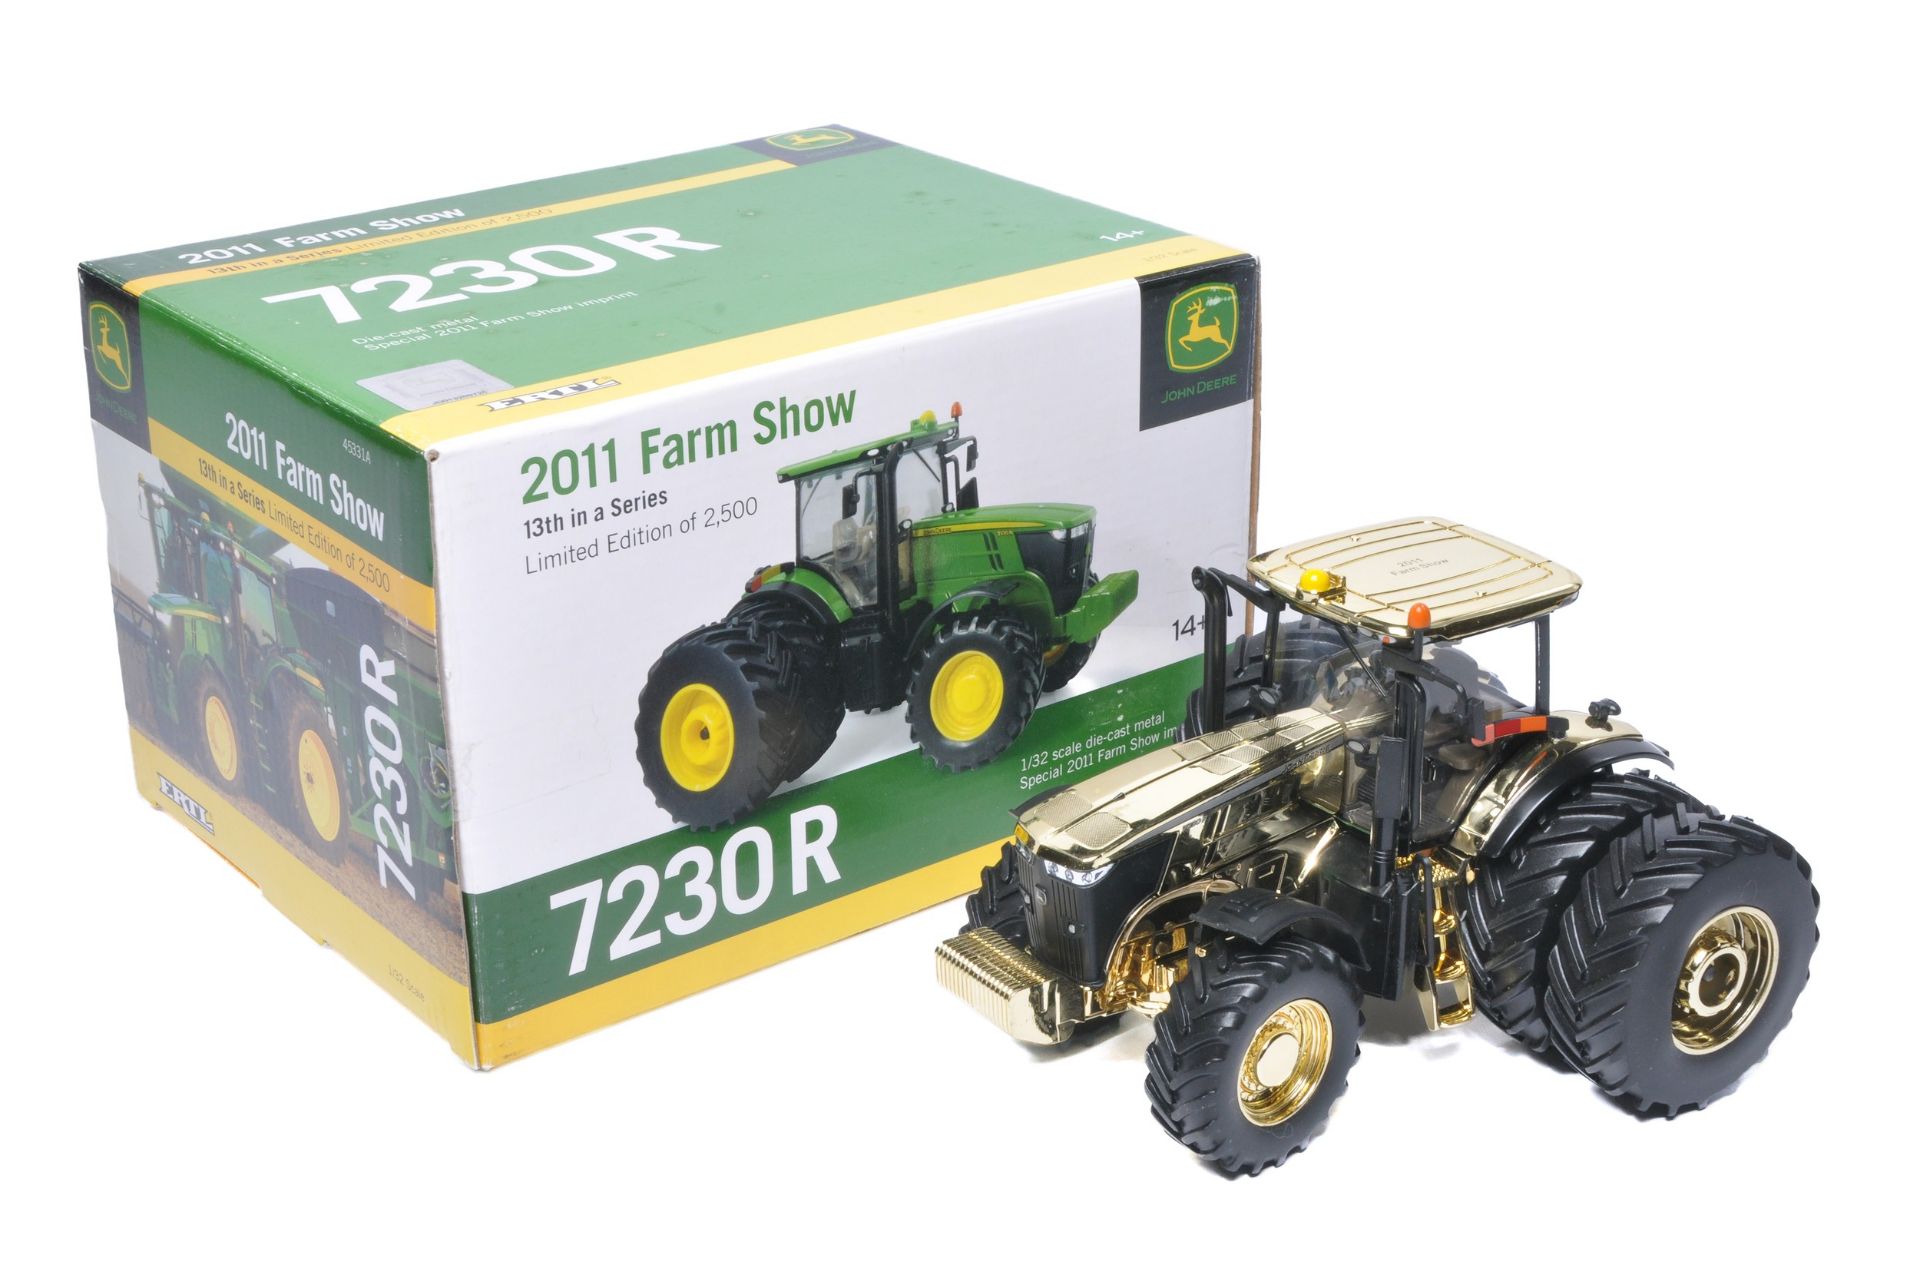 Ertl Farm Model issue comprising No. 45331A John Deere 7230R Tractor. Special Gold Chase Edition for